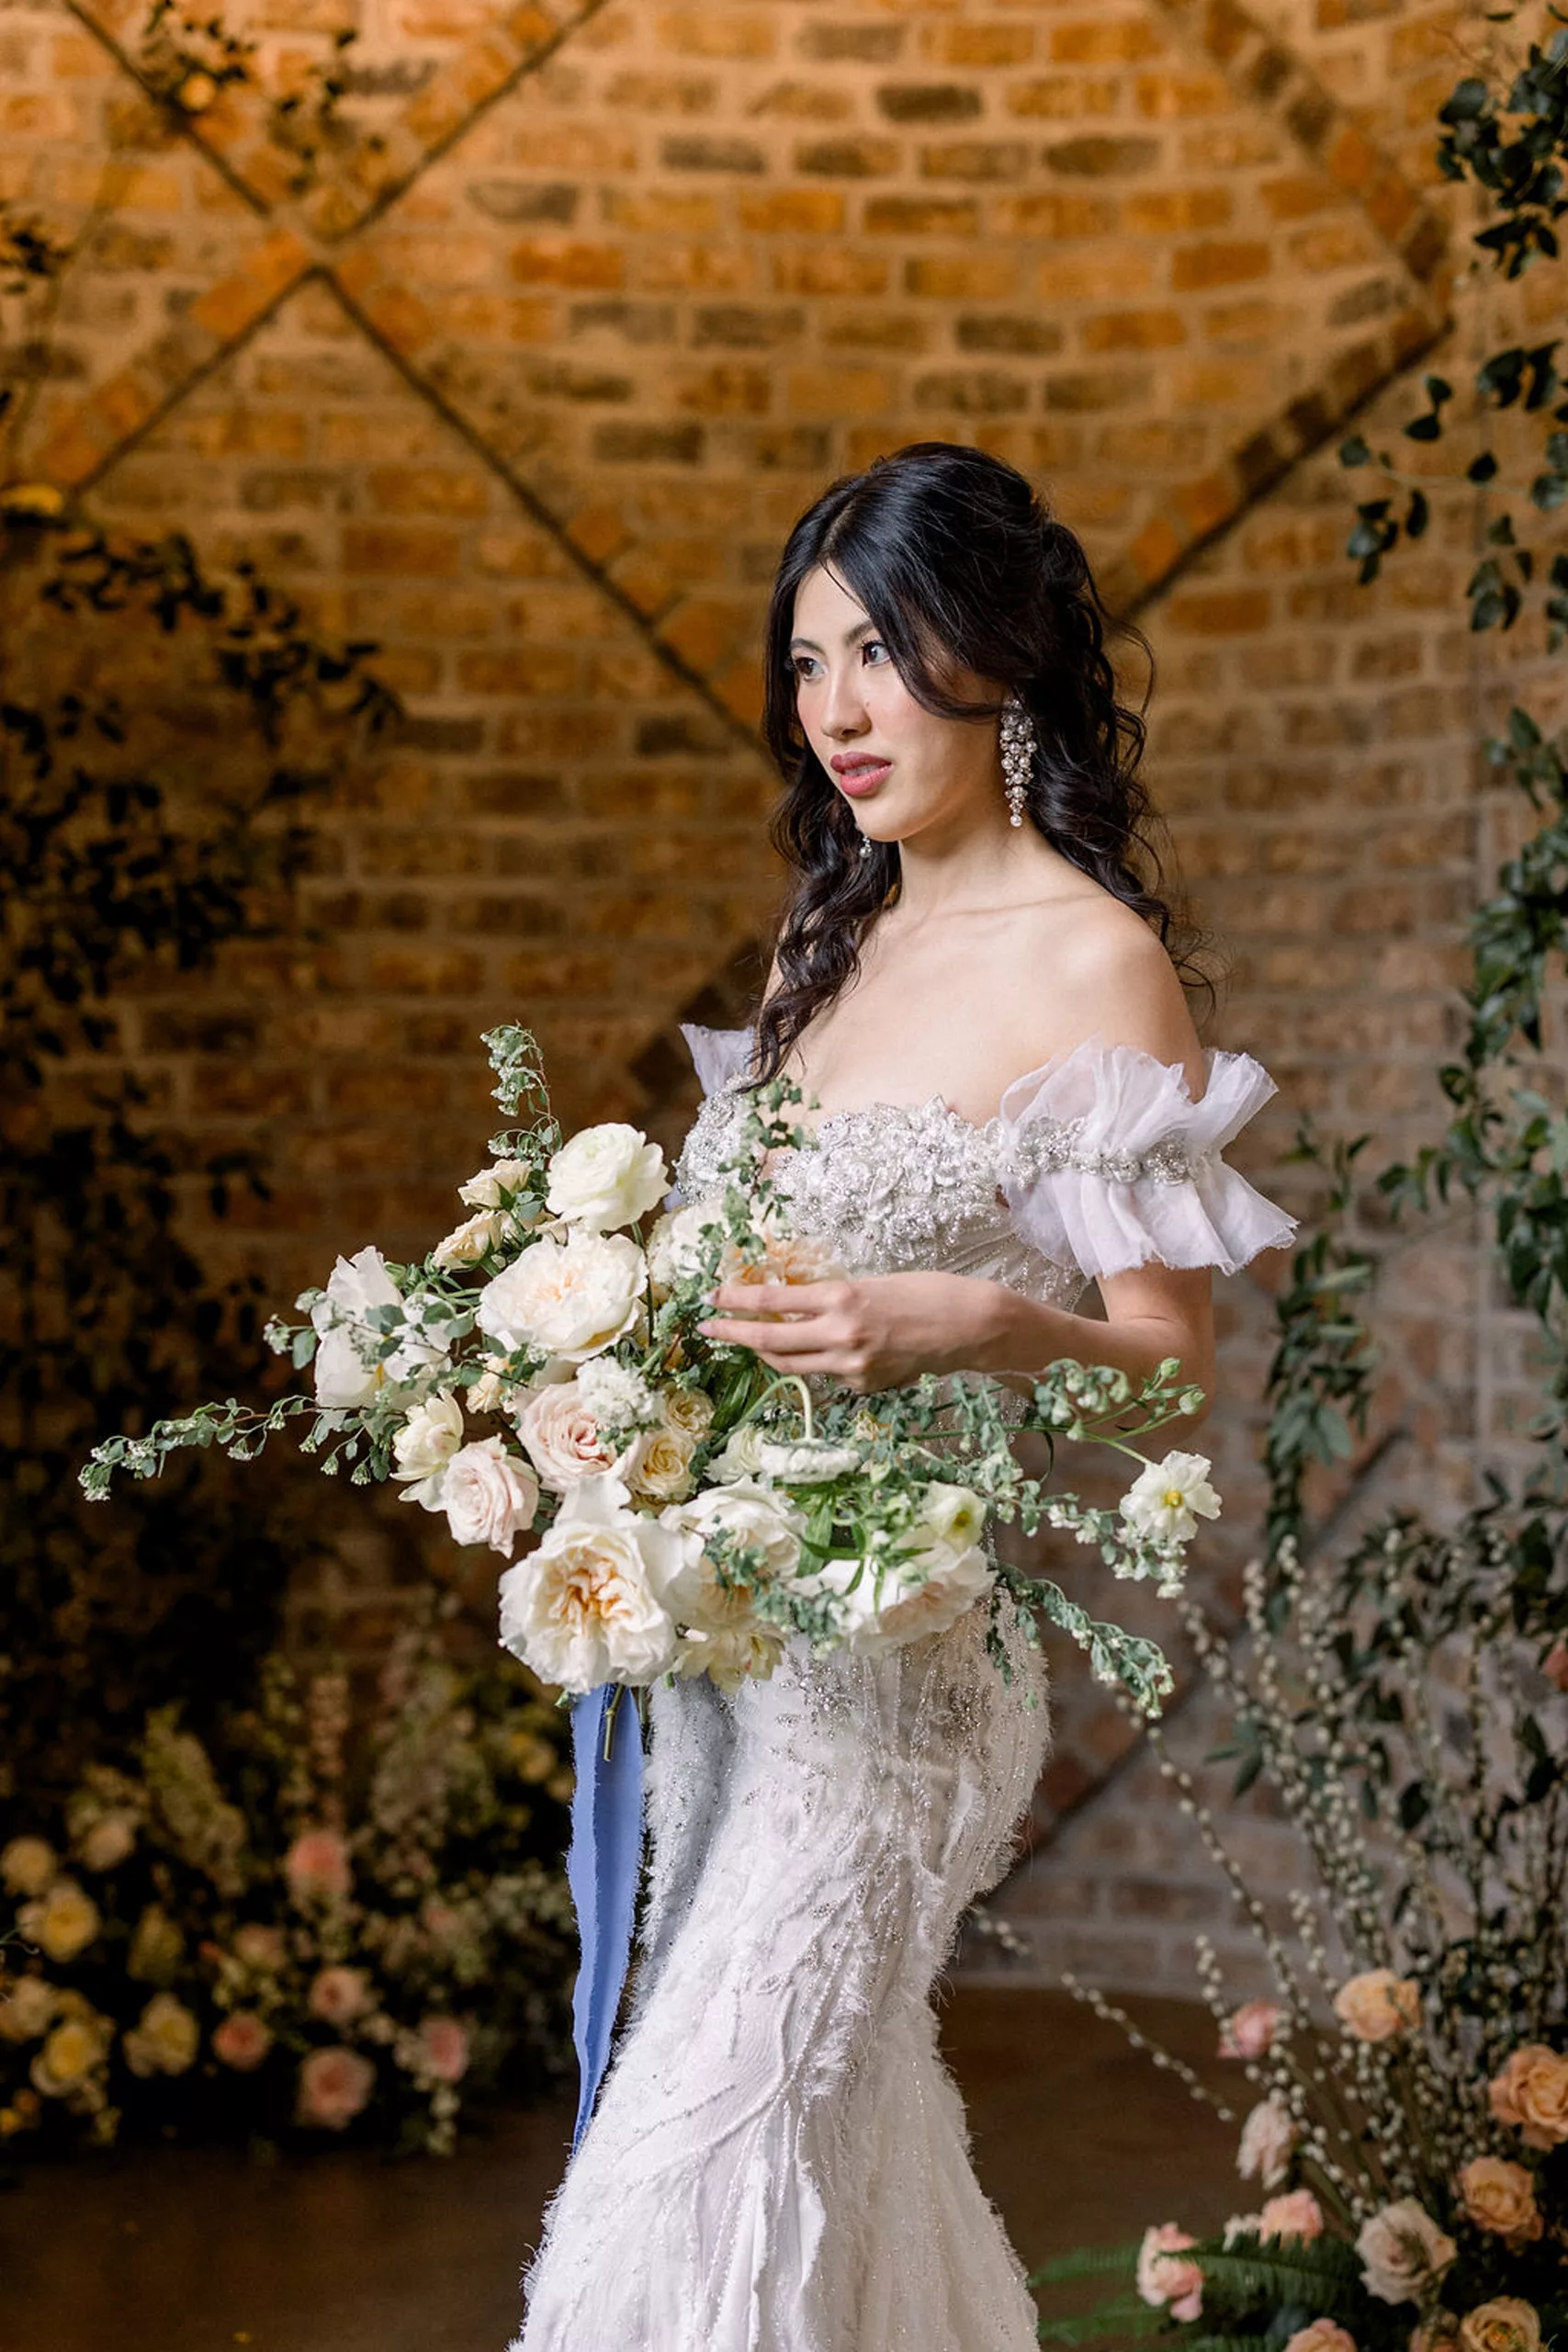 A bride holds her bouquet while standing in a brick room with large white roses